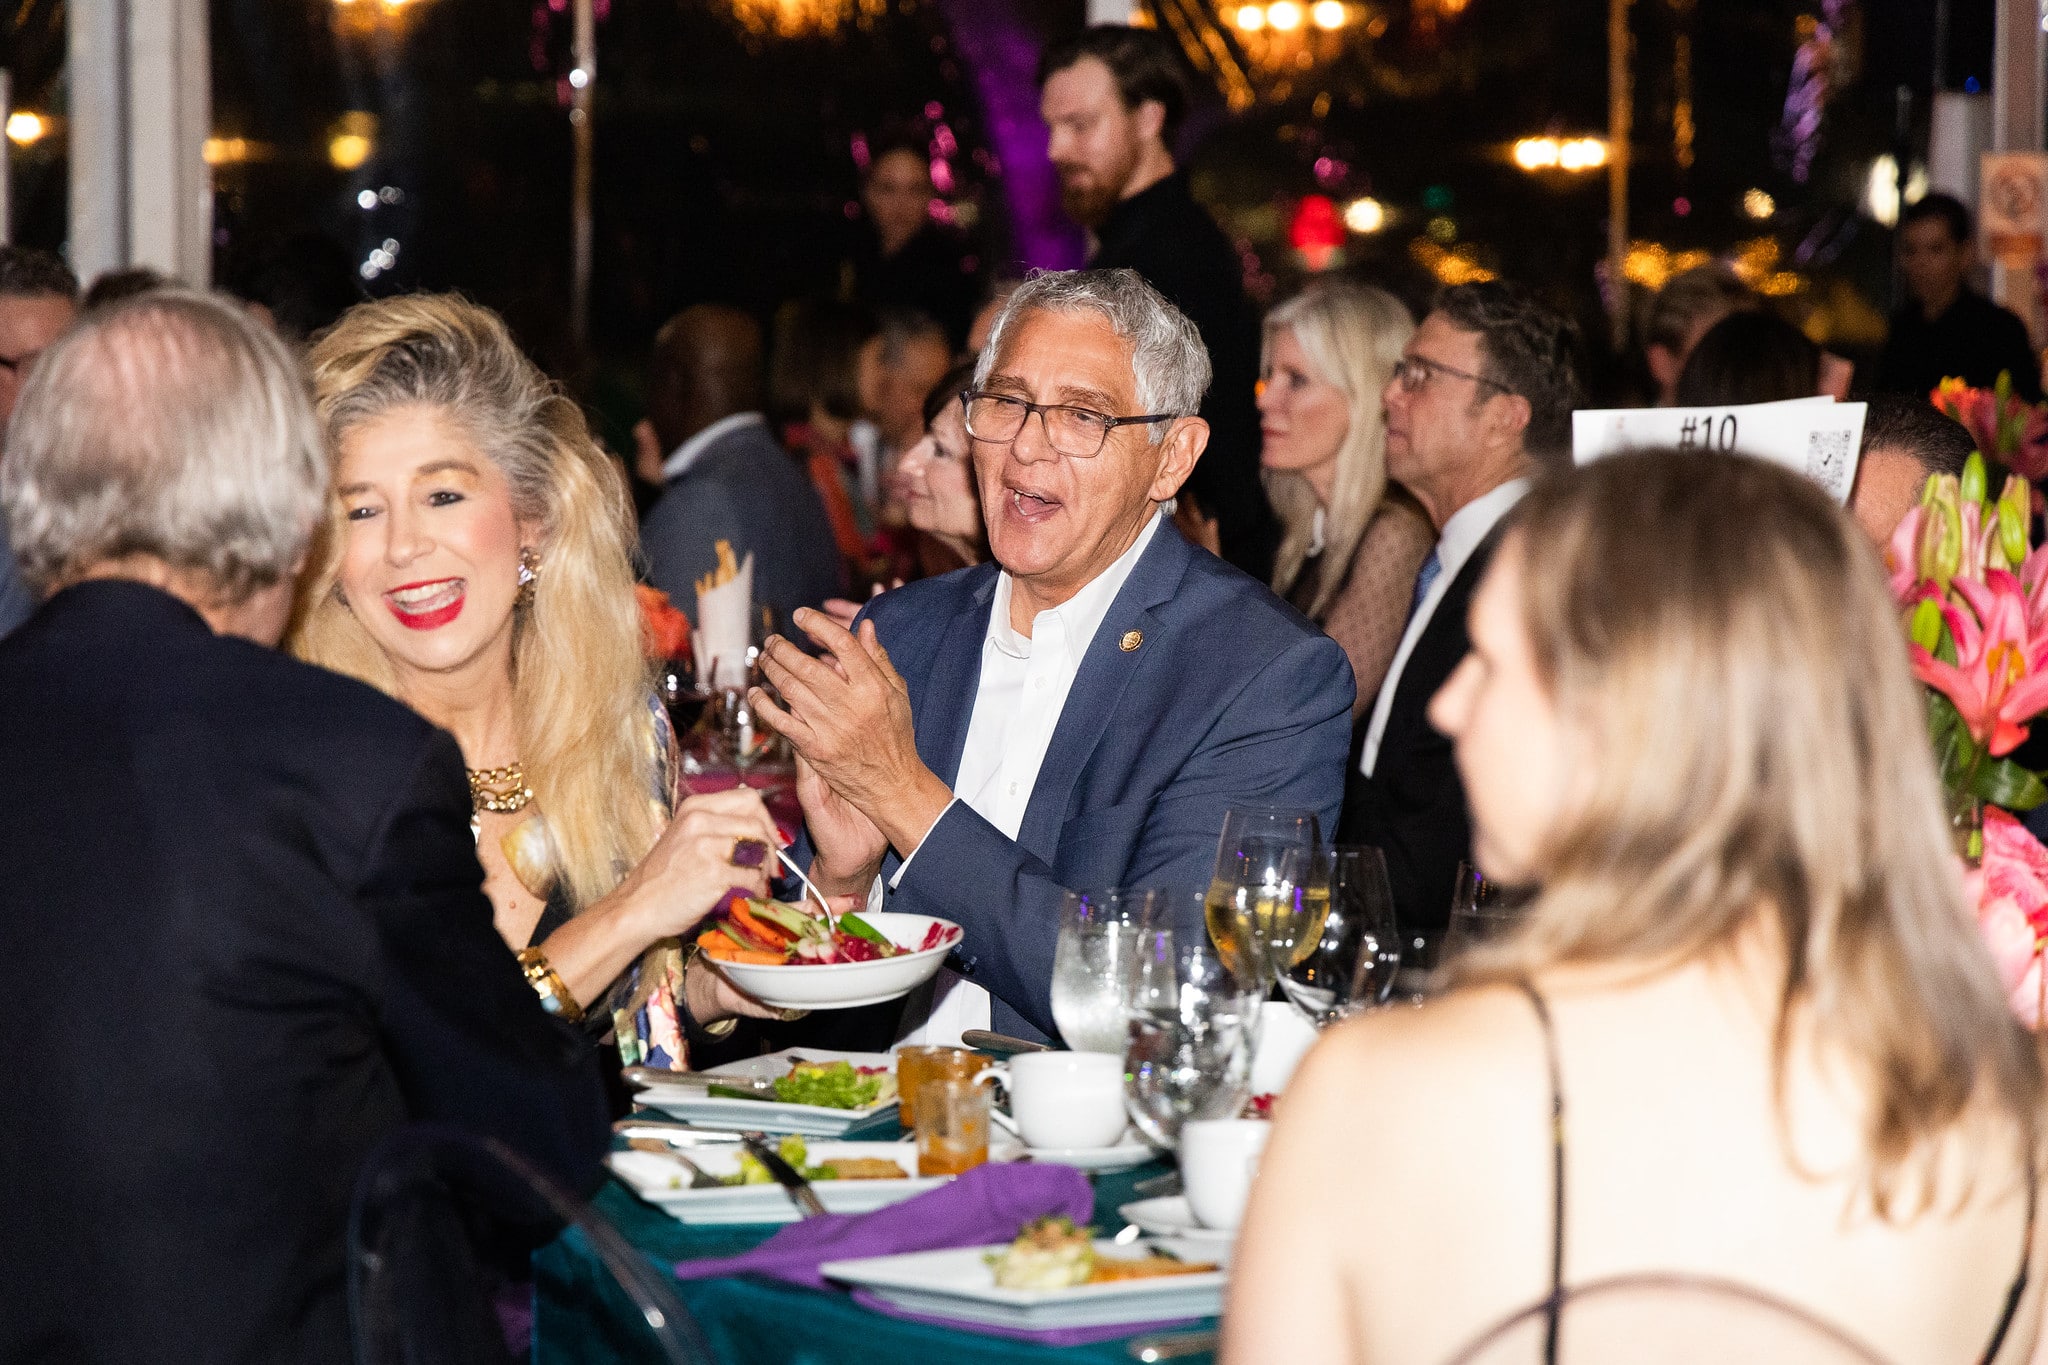 From L-R: Sofia Adrogue, Robert Gallegos  Gala on the Green® at Discovery Green in downtown Houston. February 23, 2023. Photo: Lawrence Elizabeth Knox